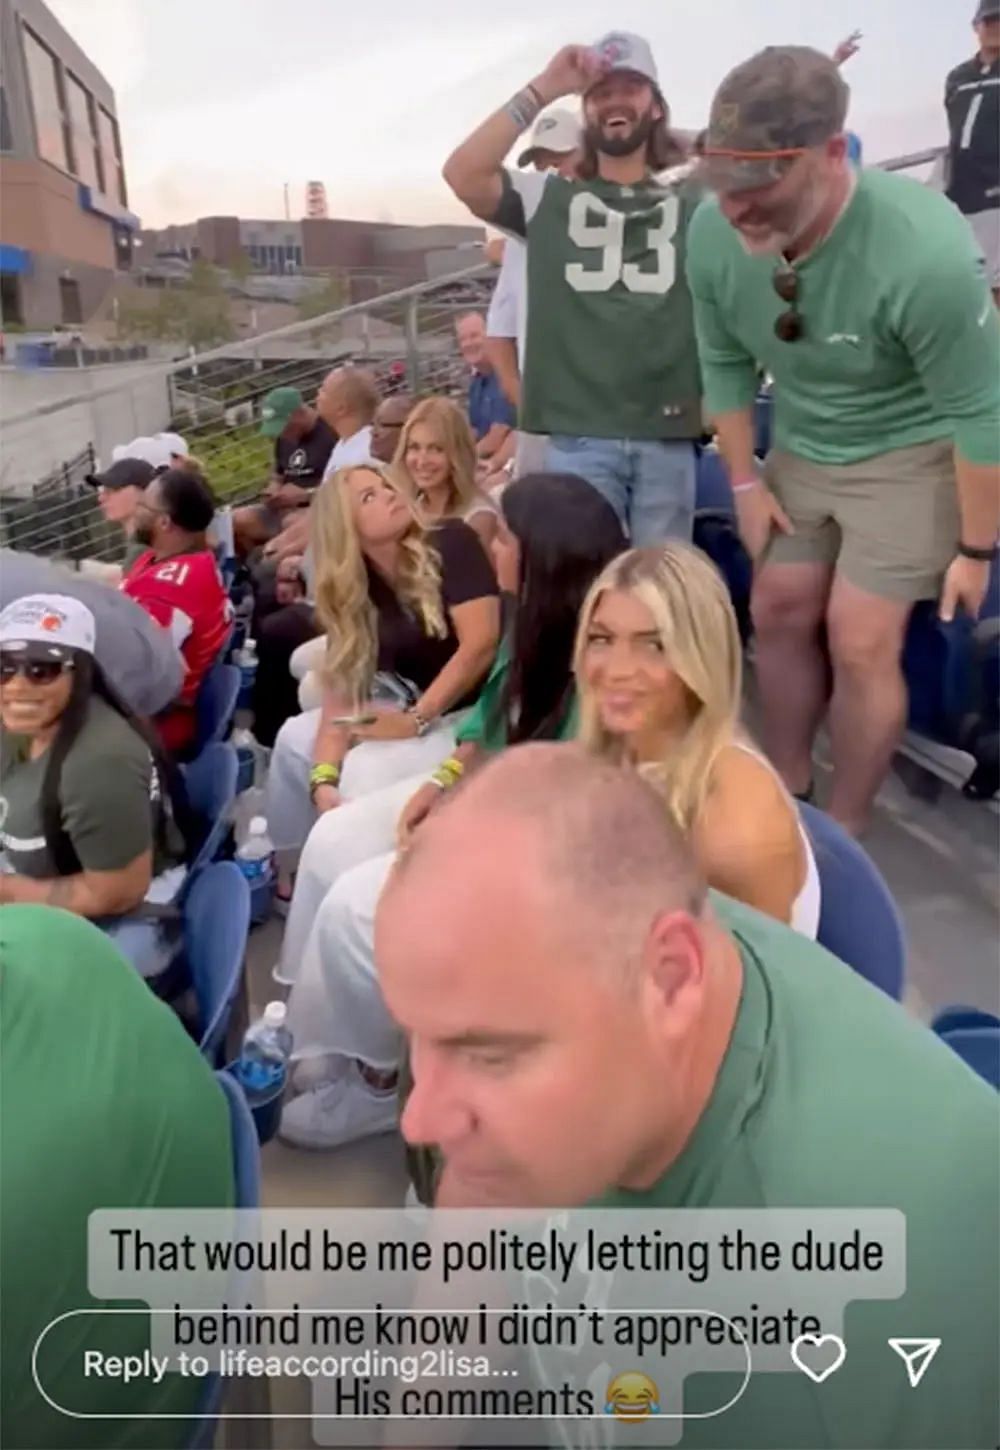 Lisa Wilson stares at a troll during the 2023 Hall of Fame Game. (Image credit: Lisa Neeleman Wilson on Instagram)